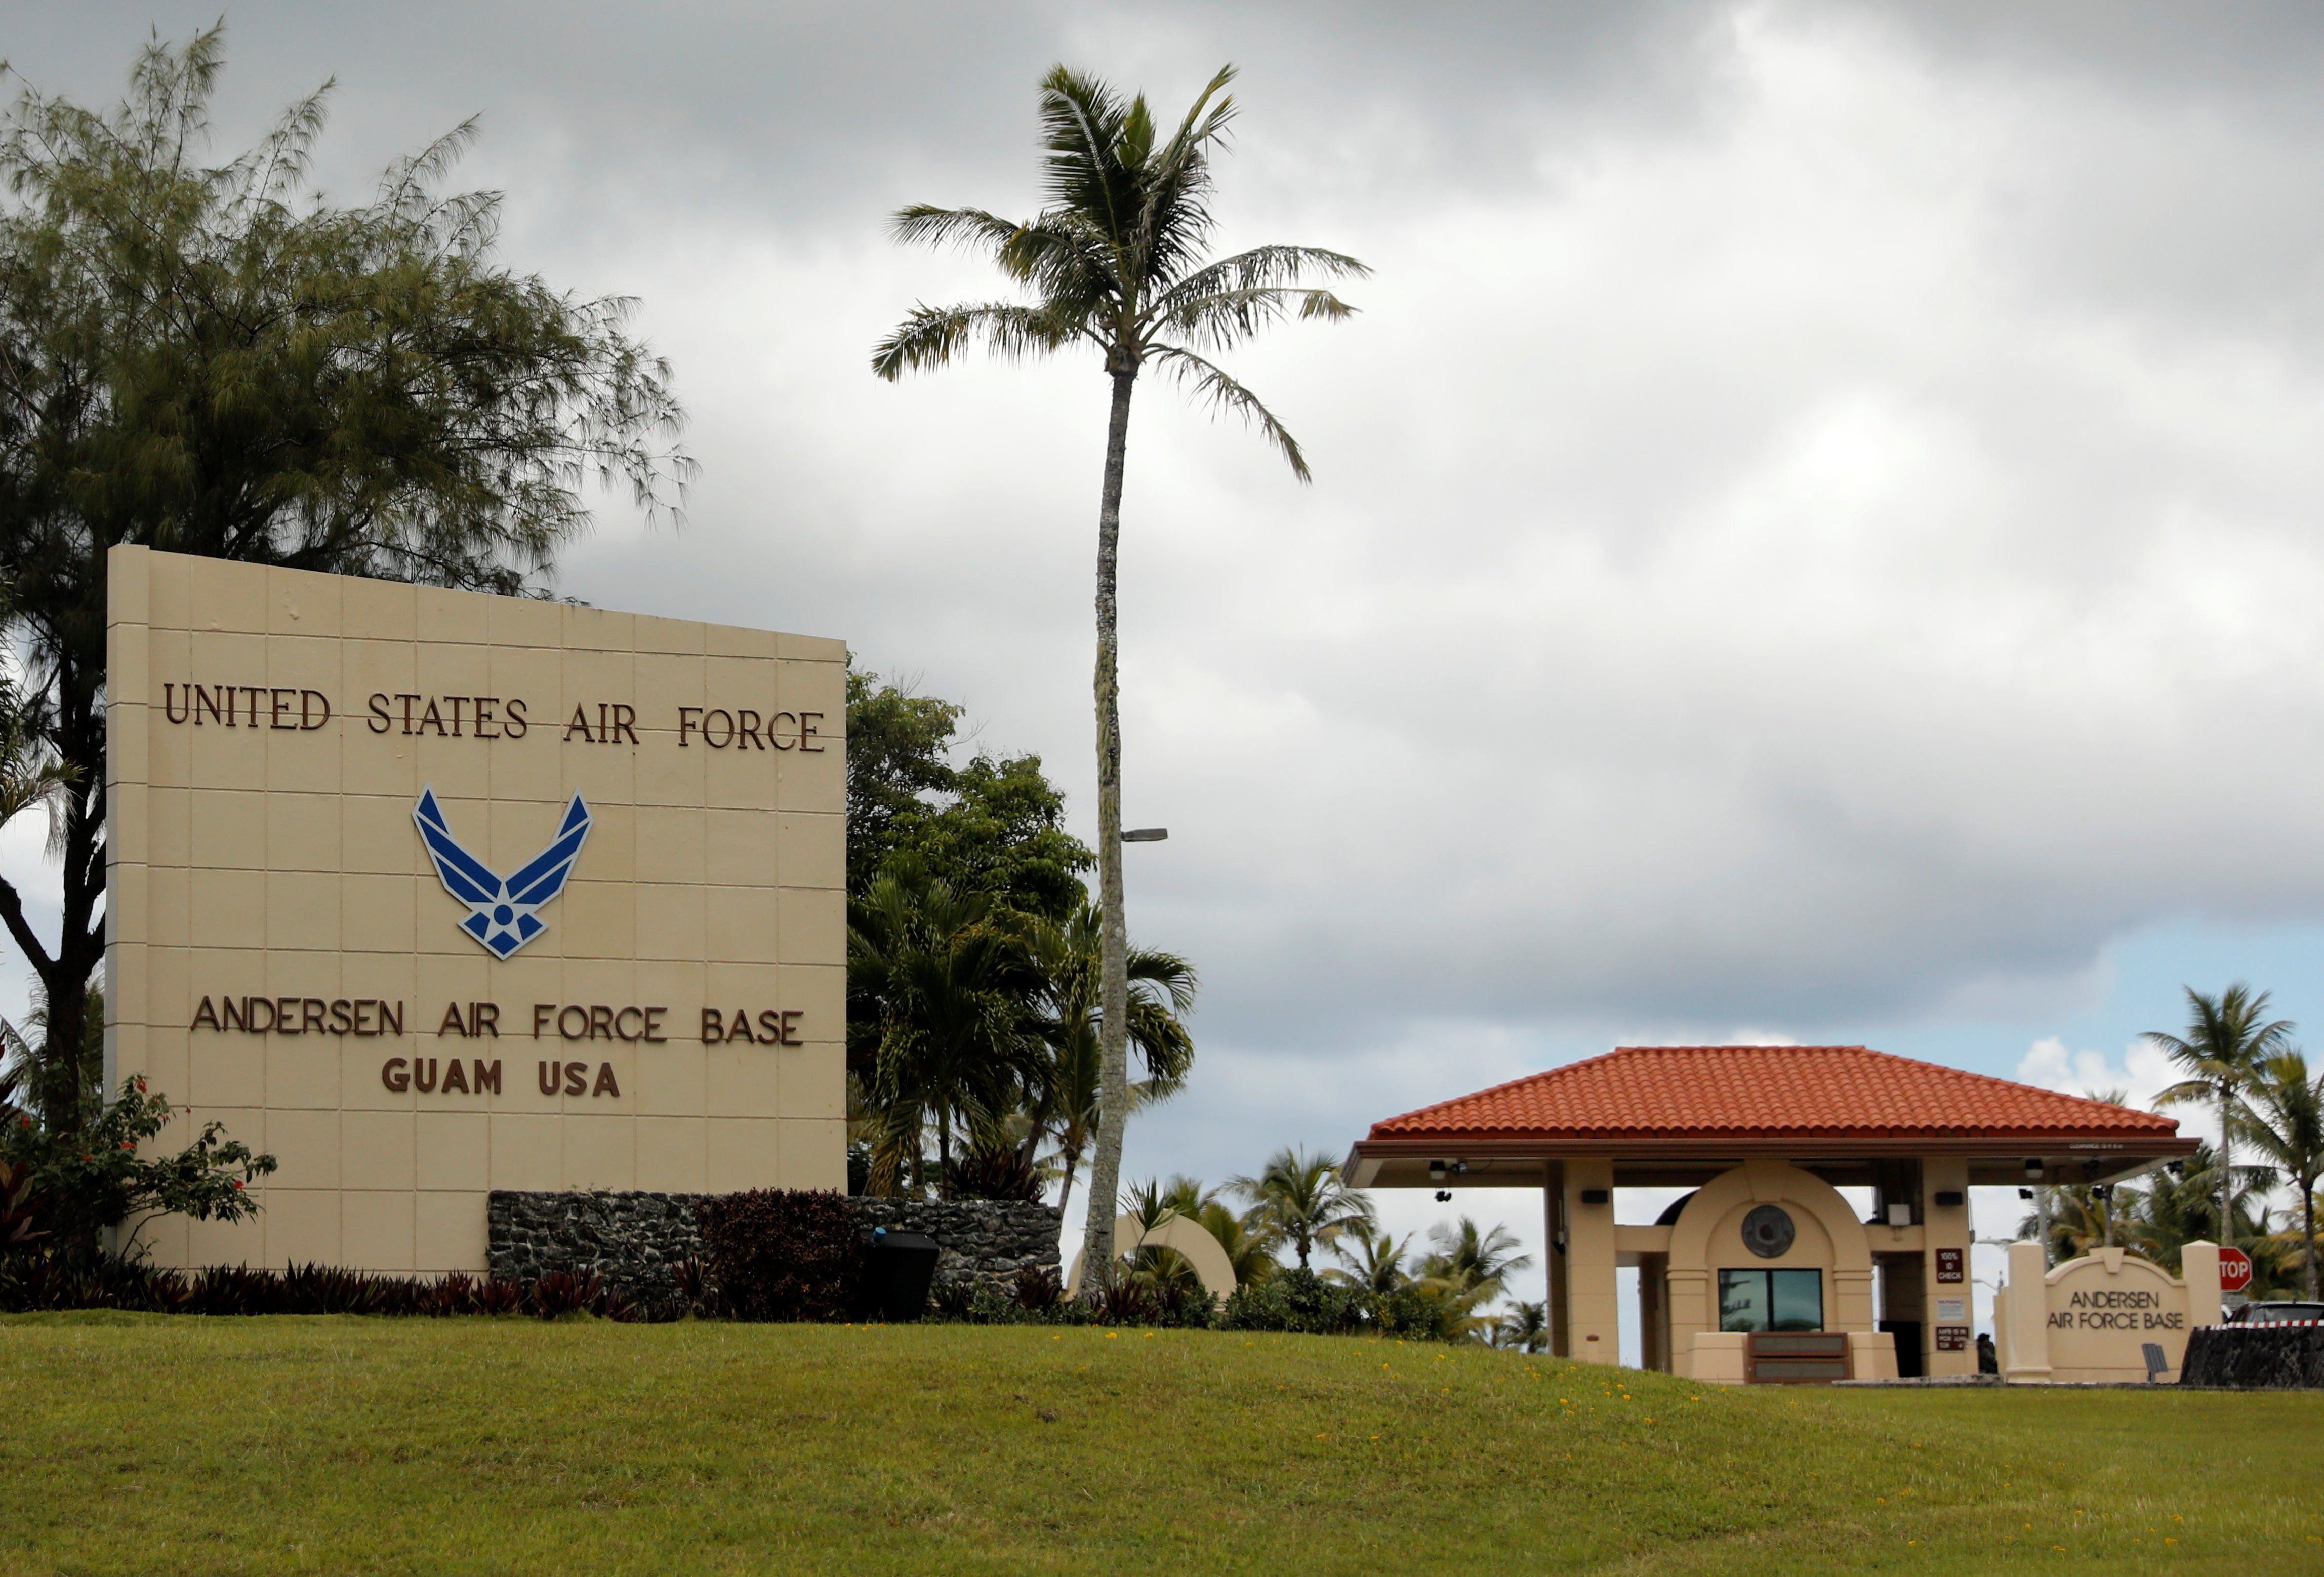 A view of the entrance of the US Andersen Air Force base on the island of Guam, a US Pacific territory.